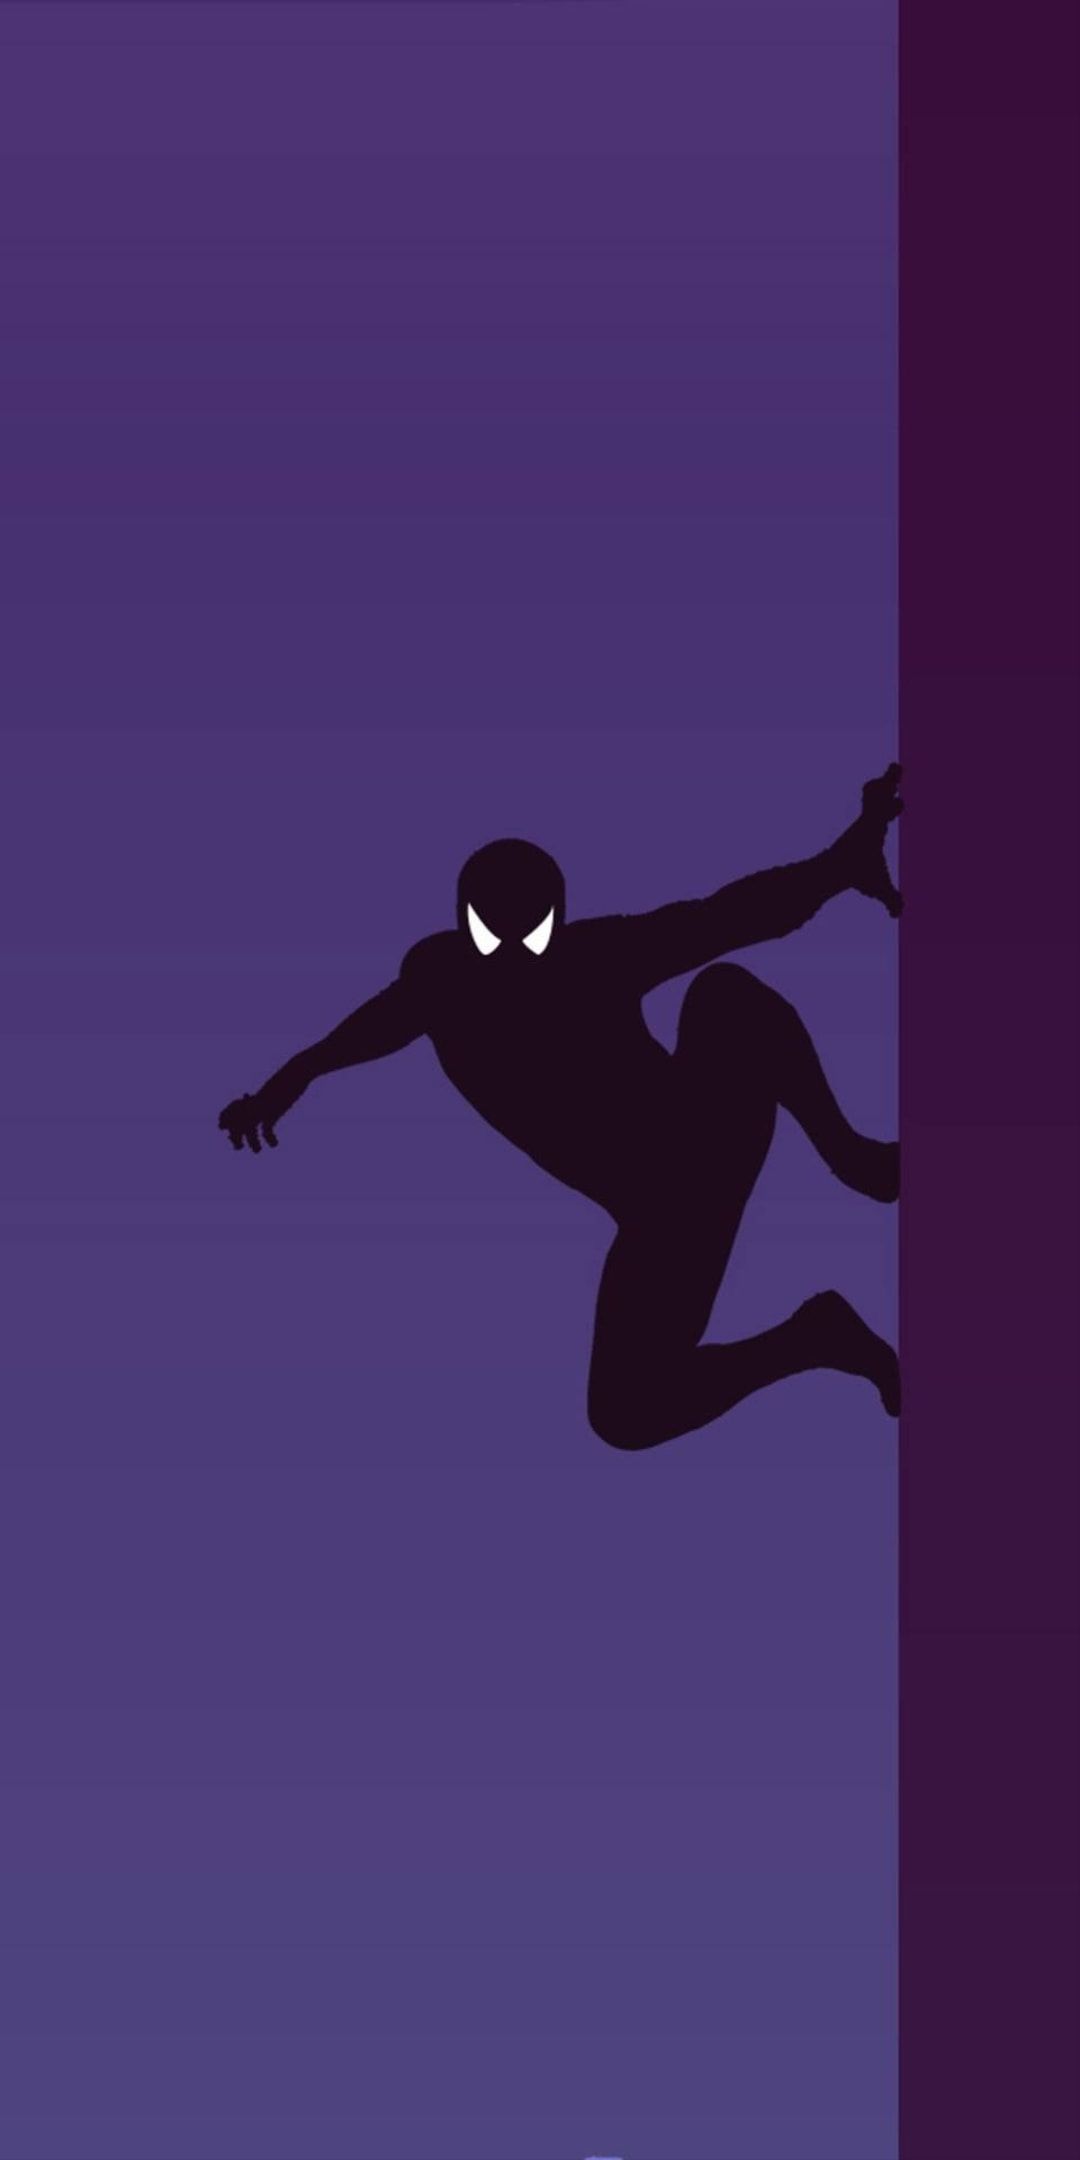 Amoled Spider Man iPhone Wallpaper. iPhone wallpaper, Android wallpaper, Black panther art